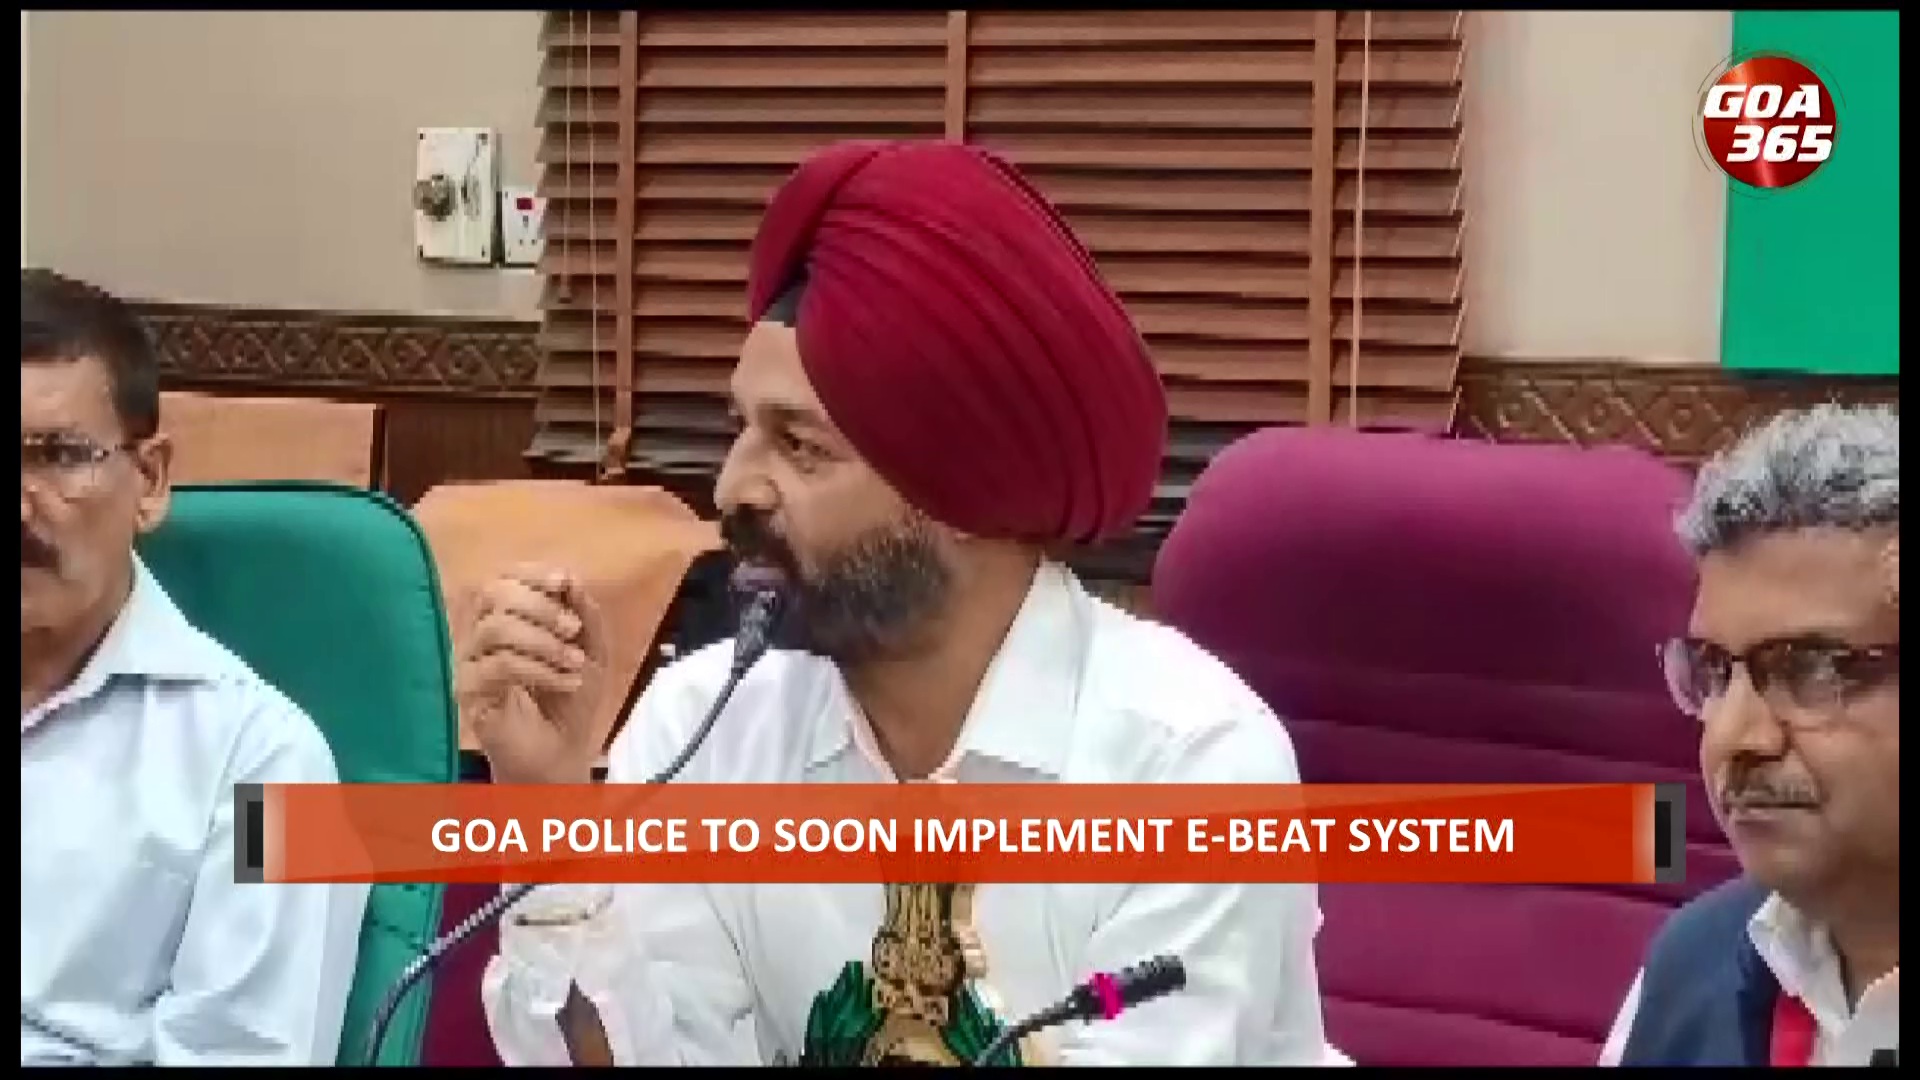 e-beat monitoring system by GEC students to soon be implemented by Goa police  